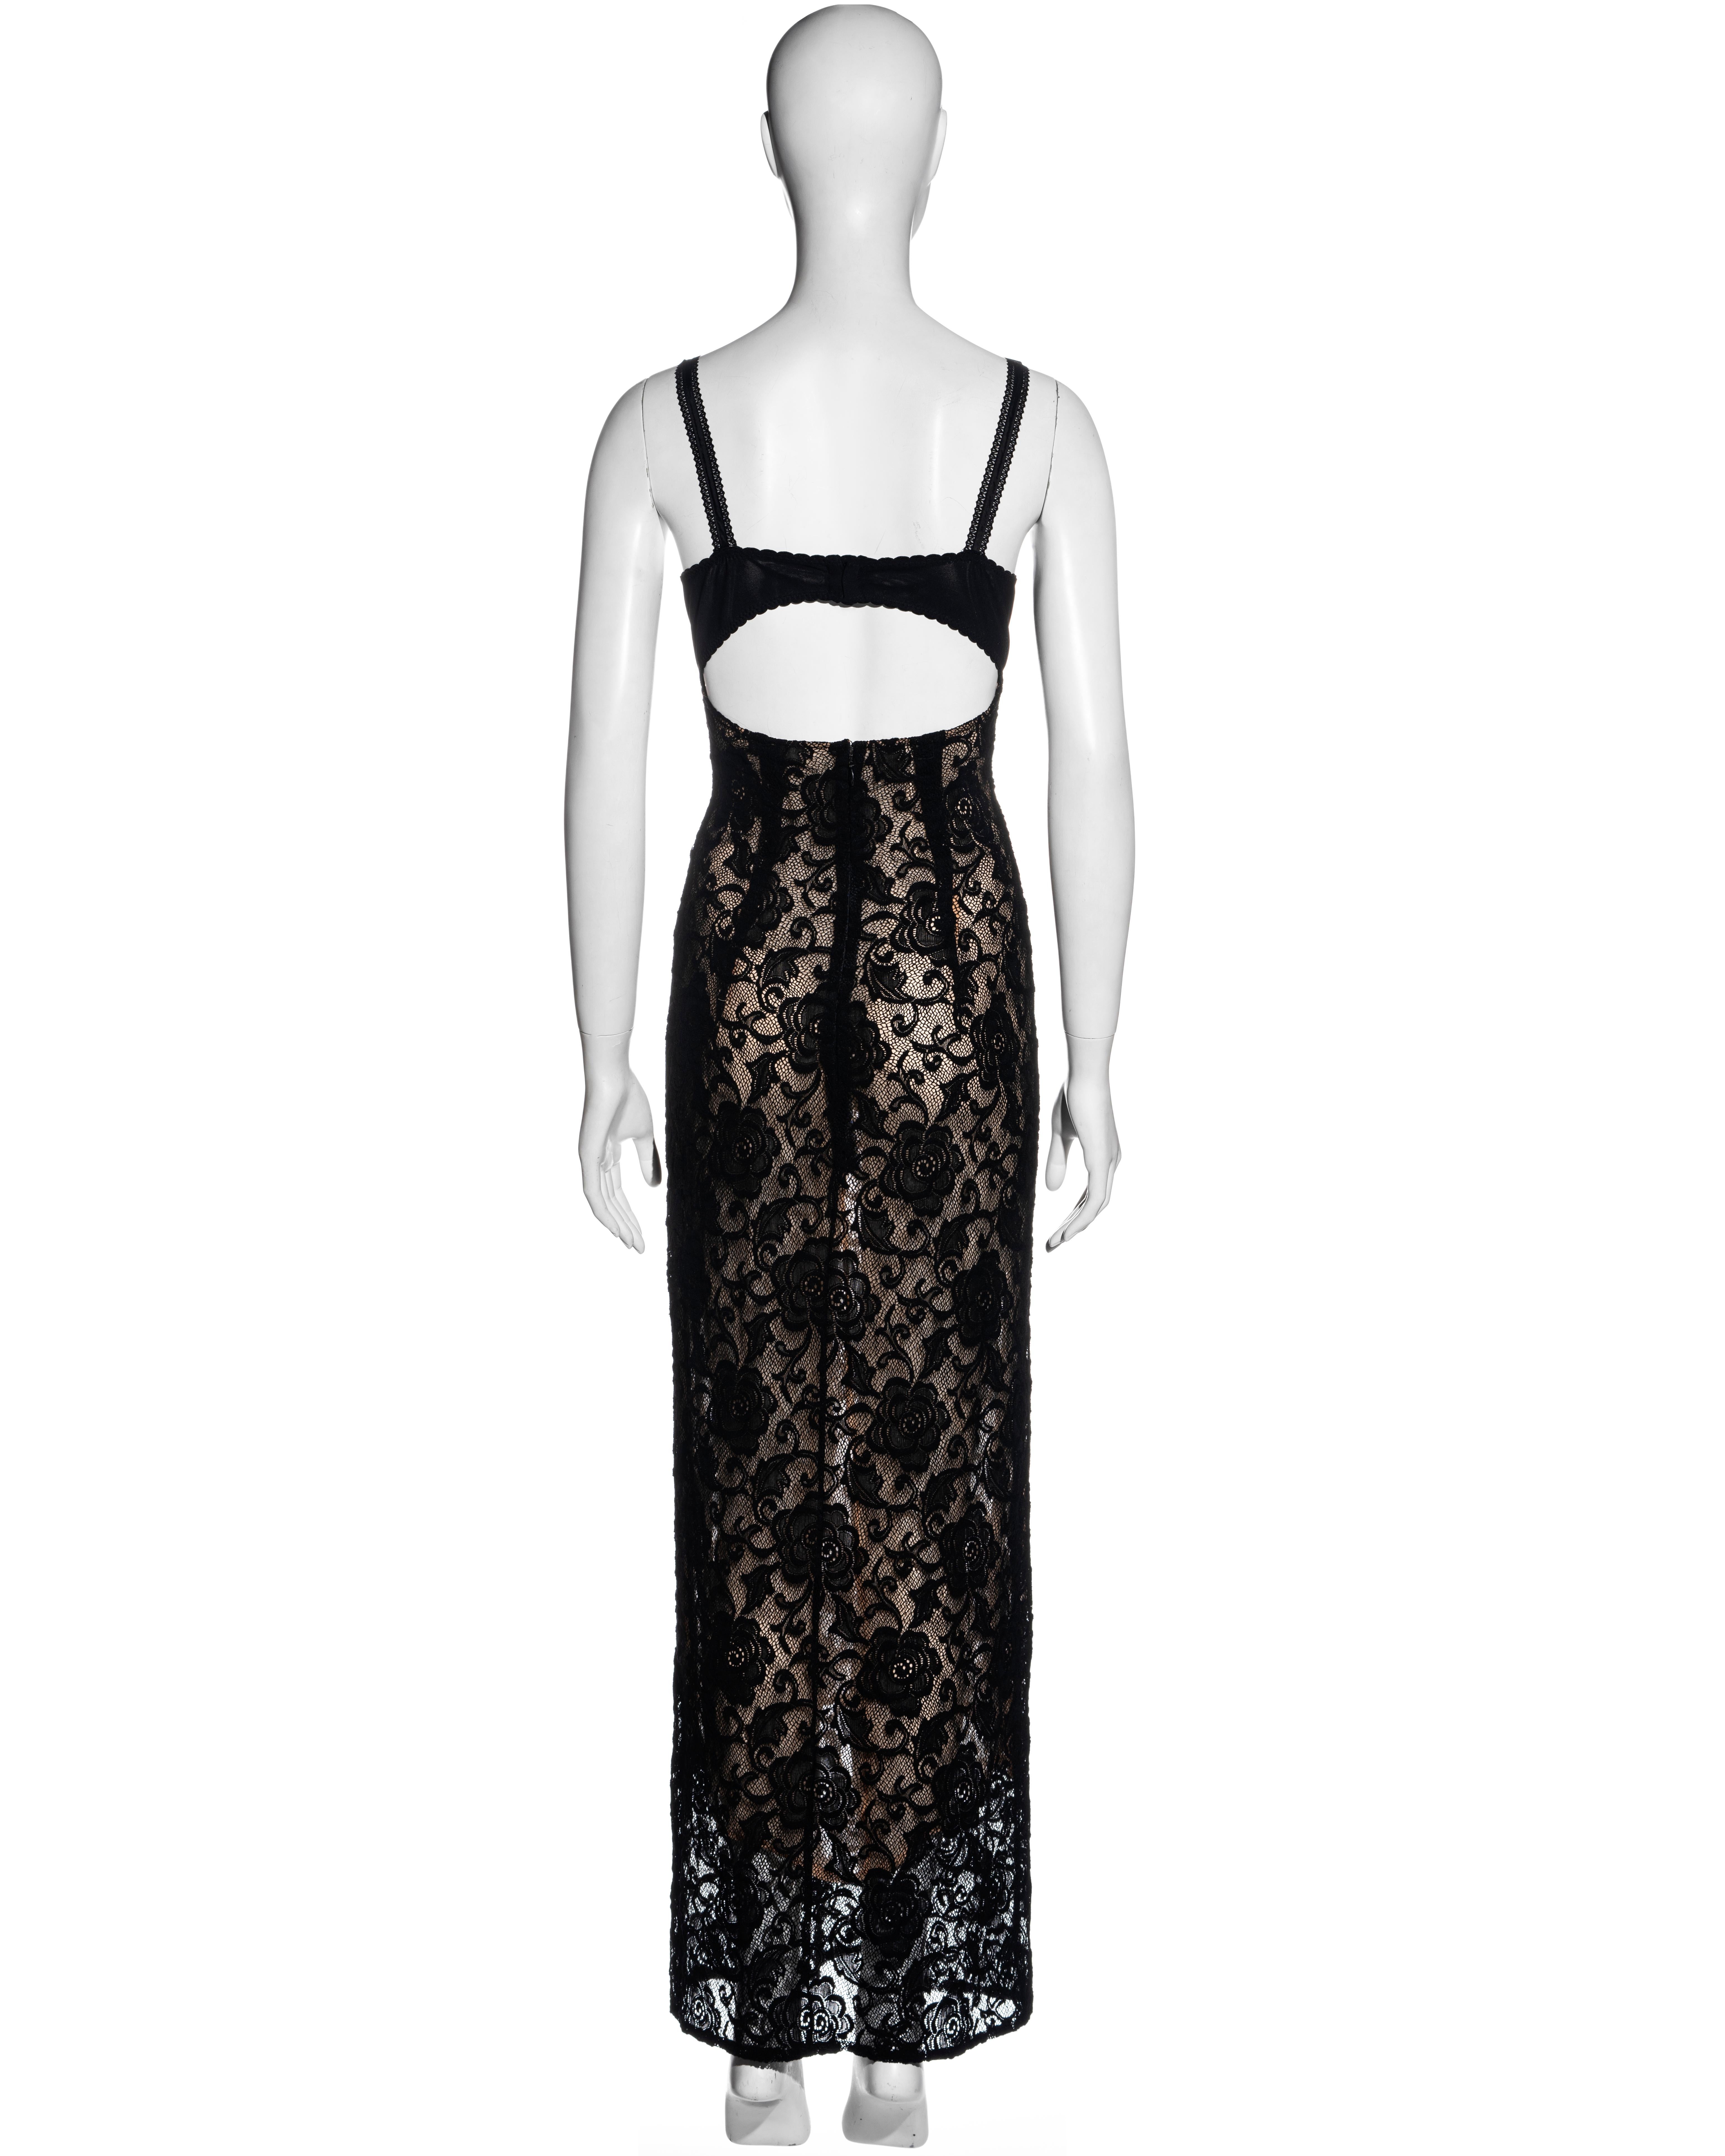 Dolce & Gabbana black lace evening dress with attached bra, ss 1997 For Sale 3